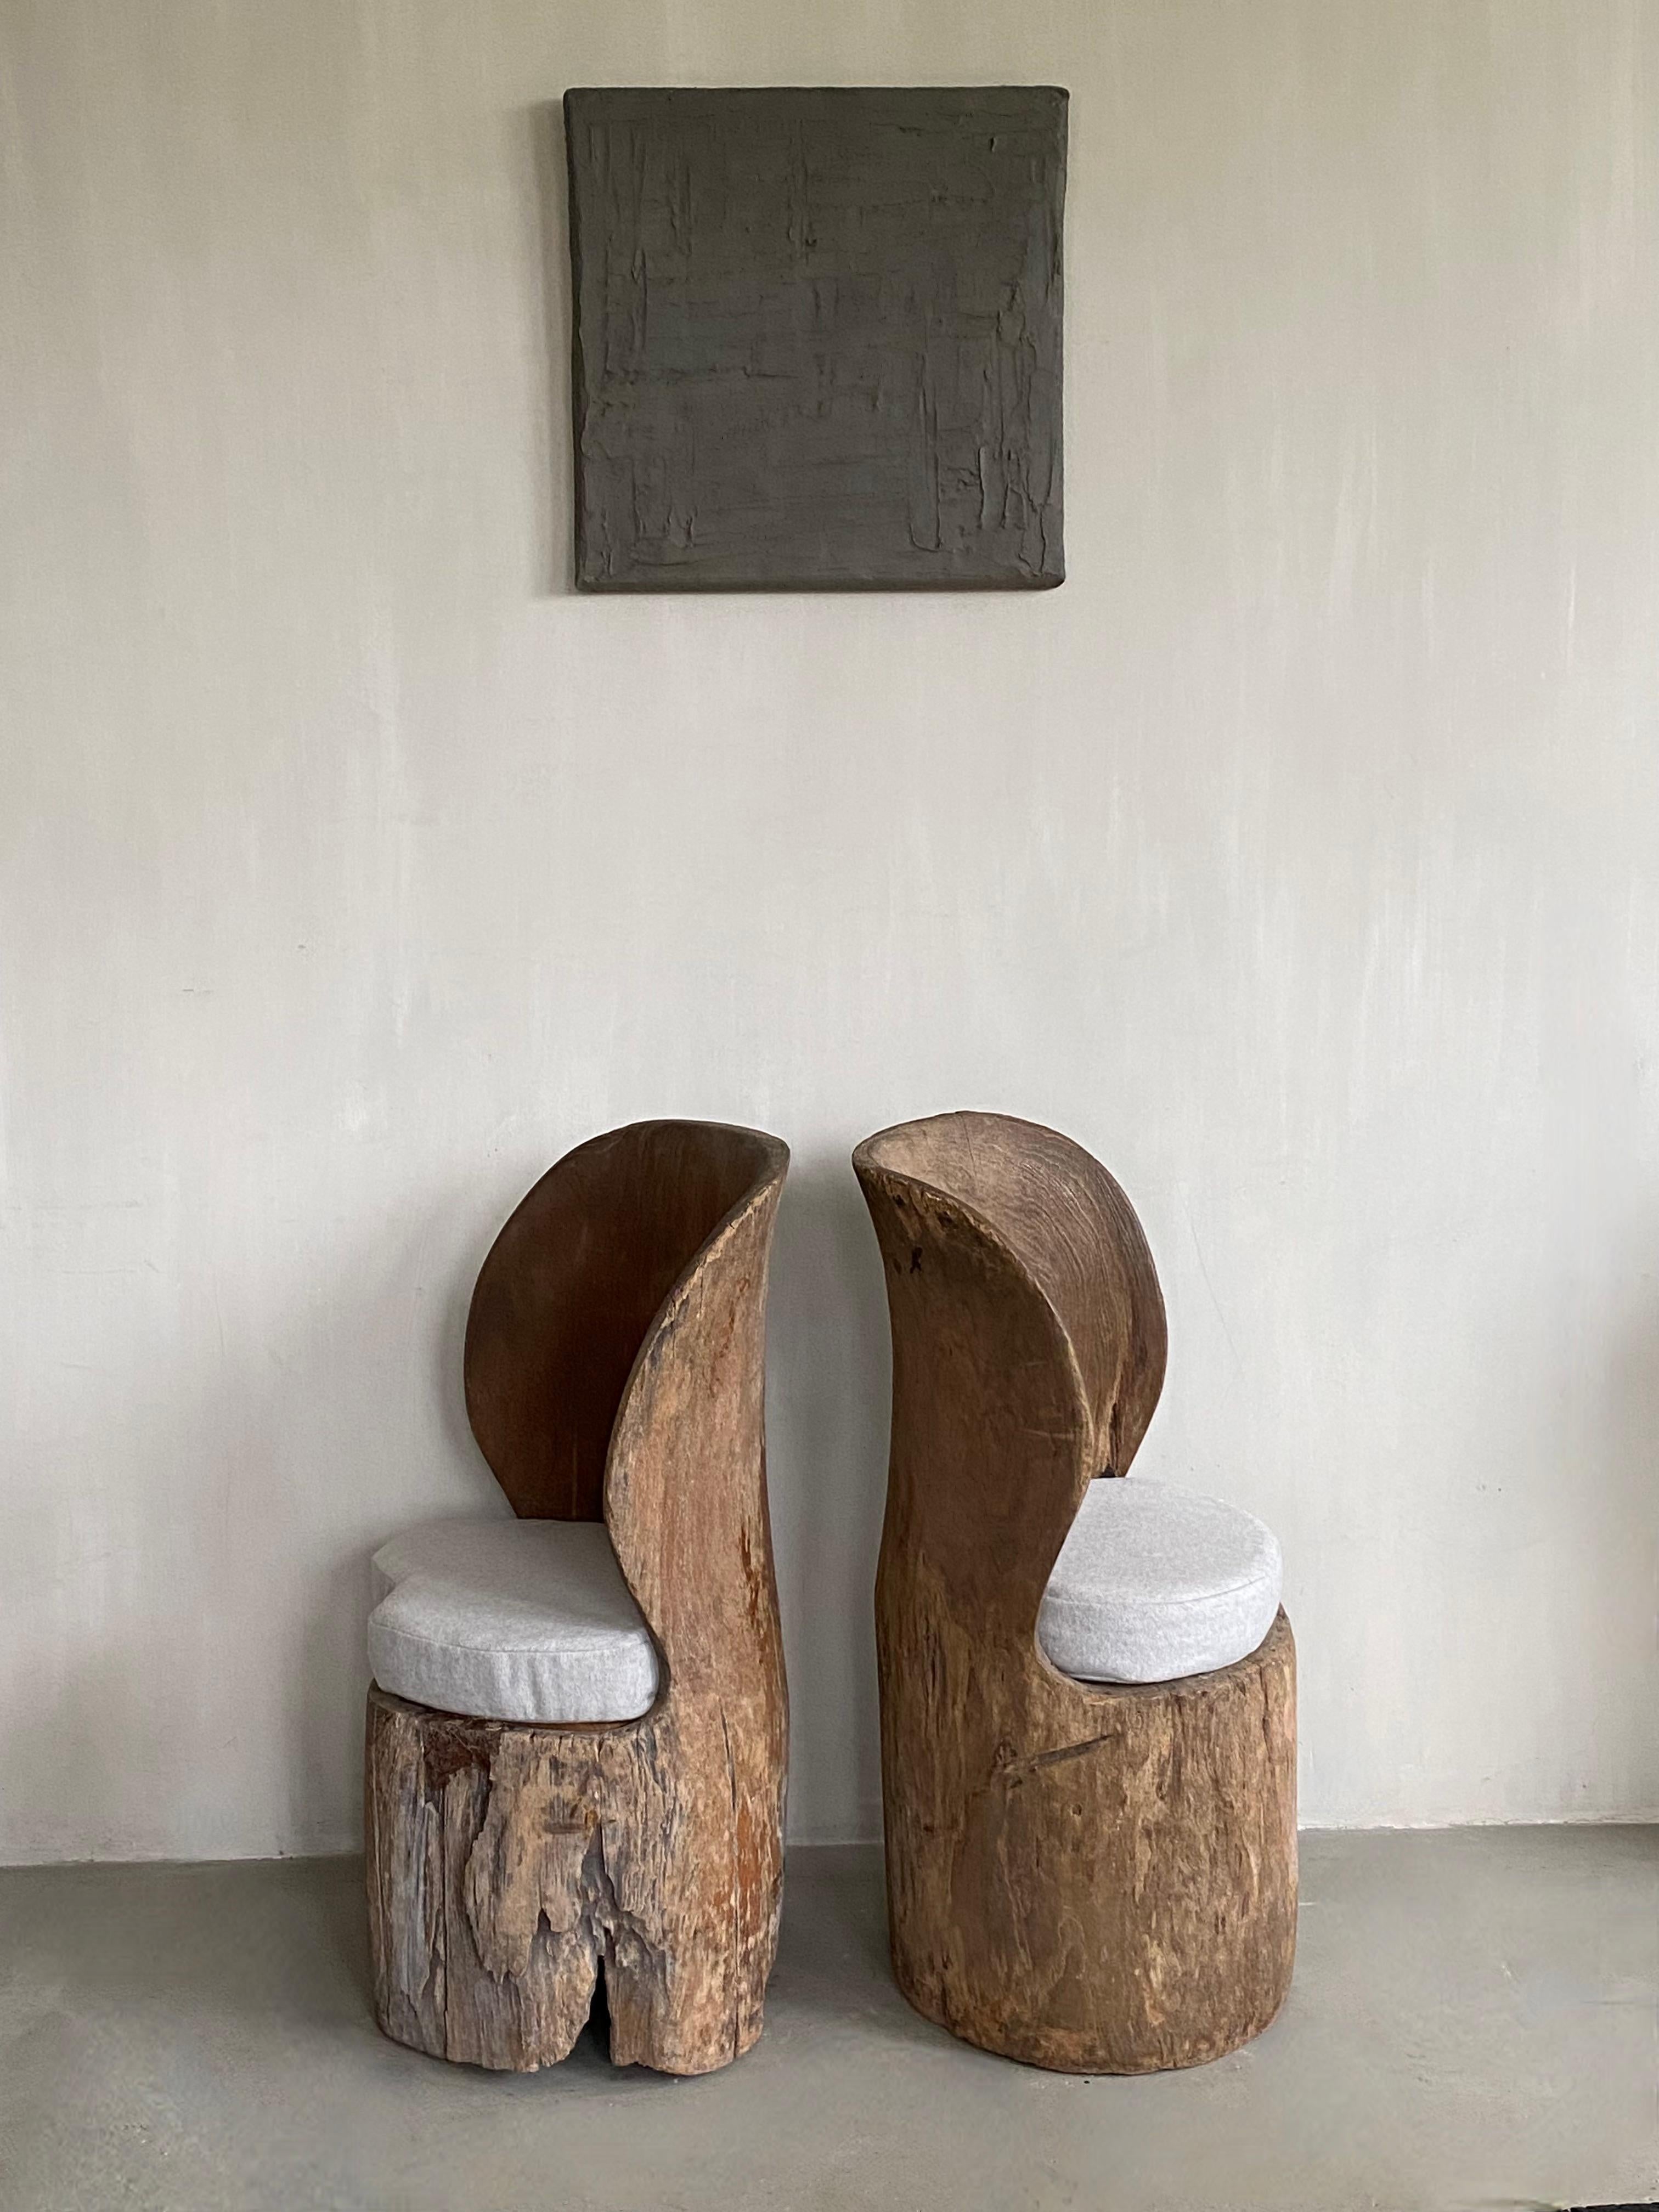 This unique pair of handcut Swedish chairs. Also sold separately.
The Wabi Sabi character of this set makes them so different yet fitting together.

Extra cushions in Belgian wool for seating comfort.
Beautiful natural aging due to use and age,